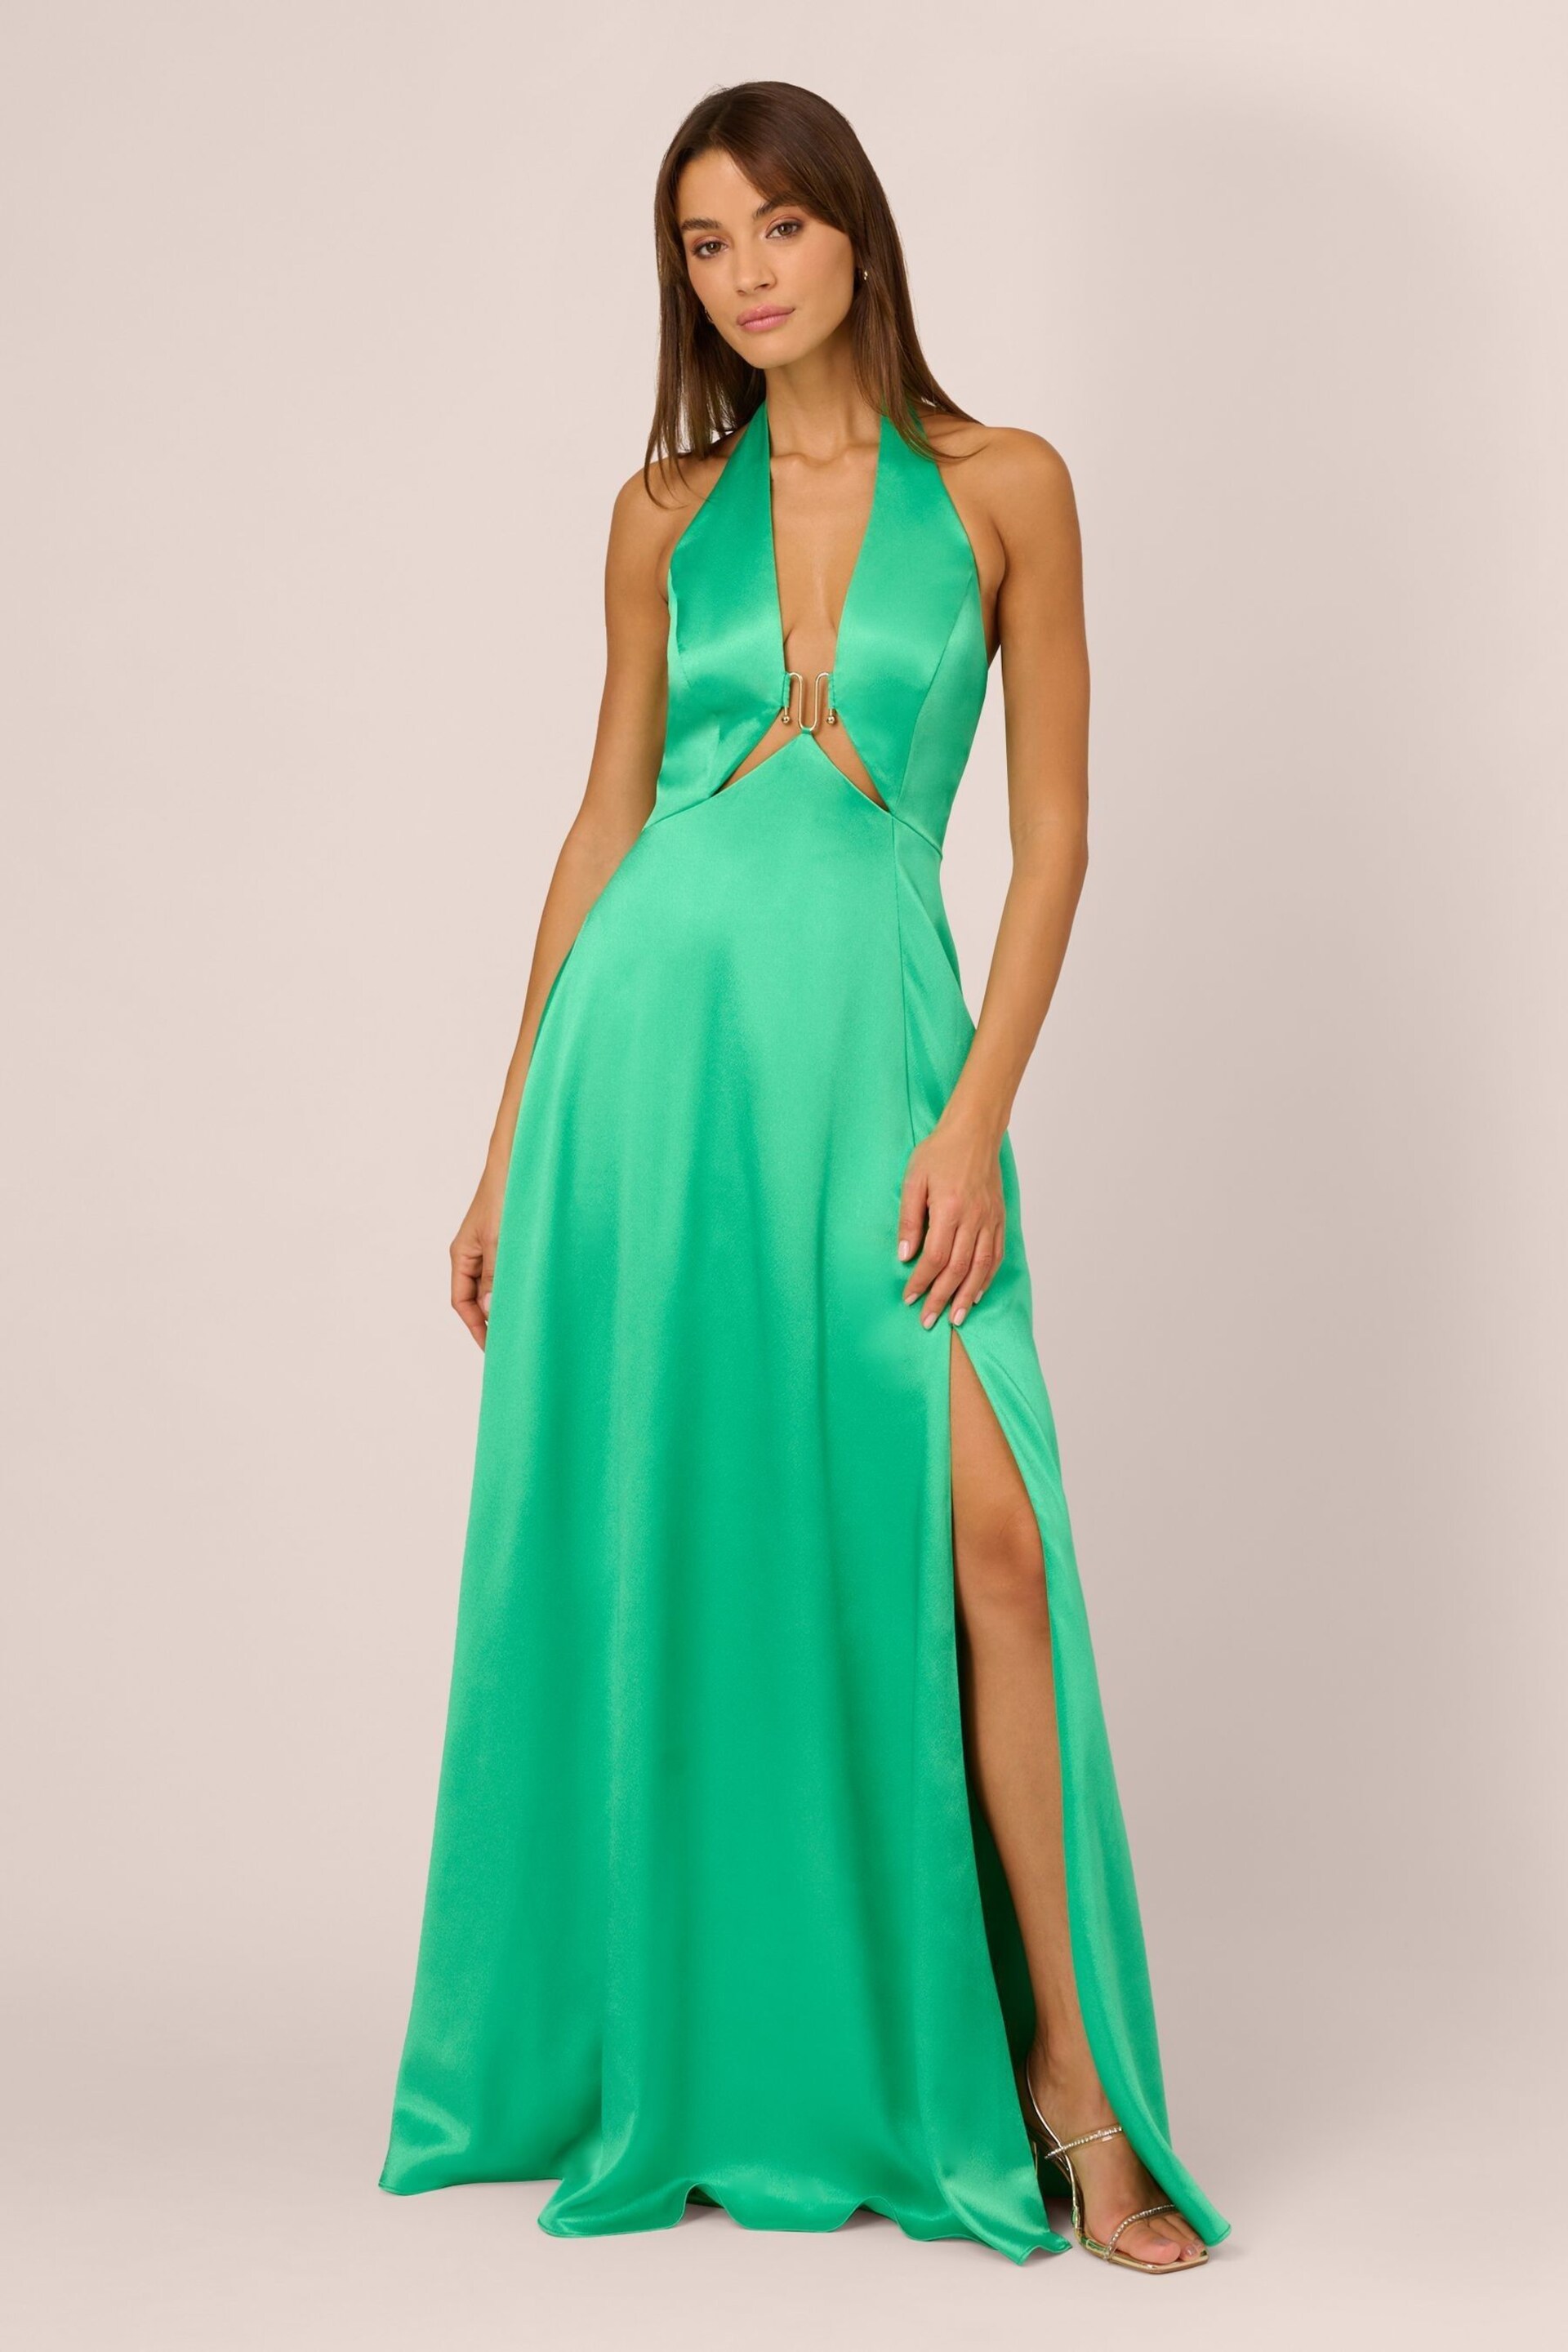 Adrianna Papell Green Liquid Satin A-Line Gown - Image 1 of 7